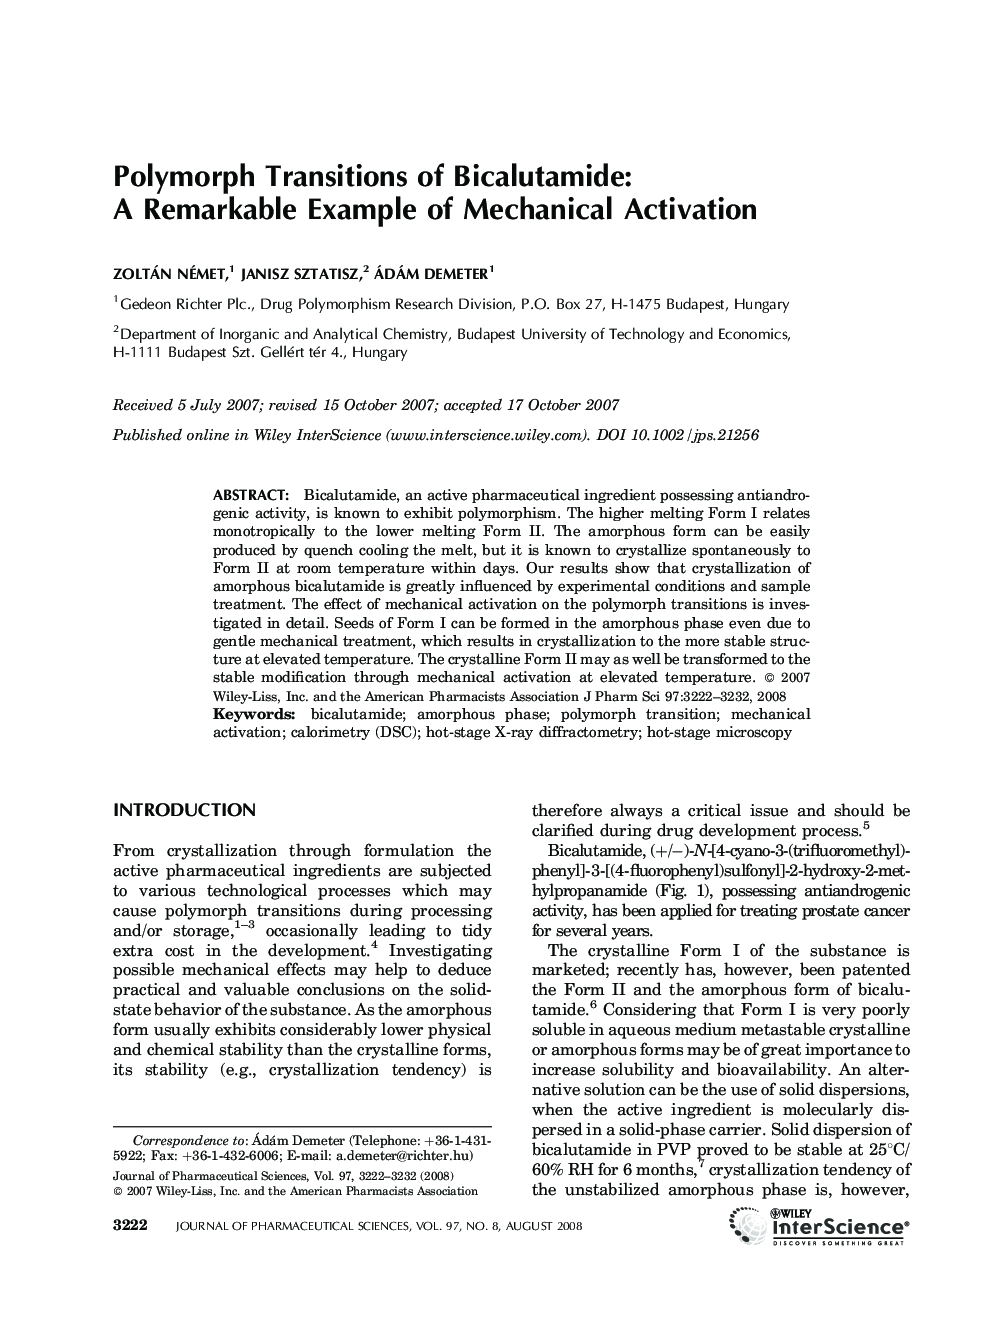 Polymorph Transitions of Bicalutamide: A Remarkable Example of Mechanical Activation